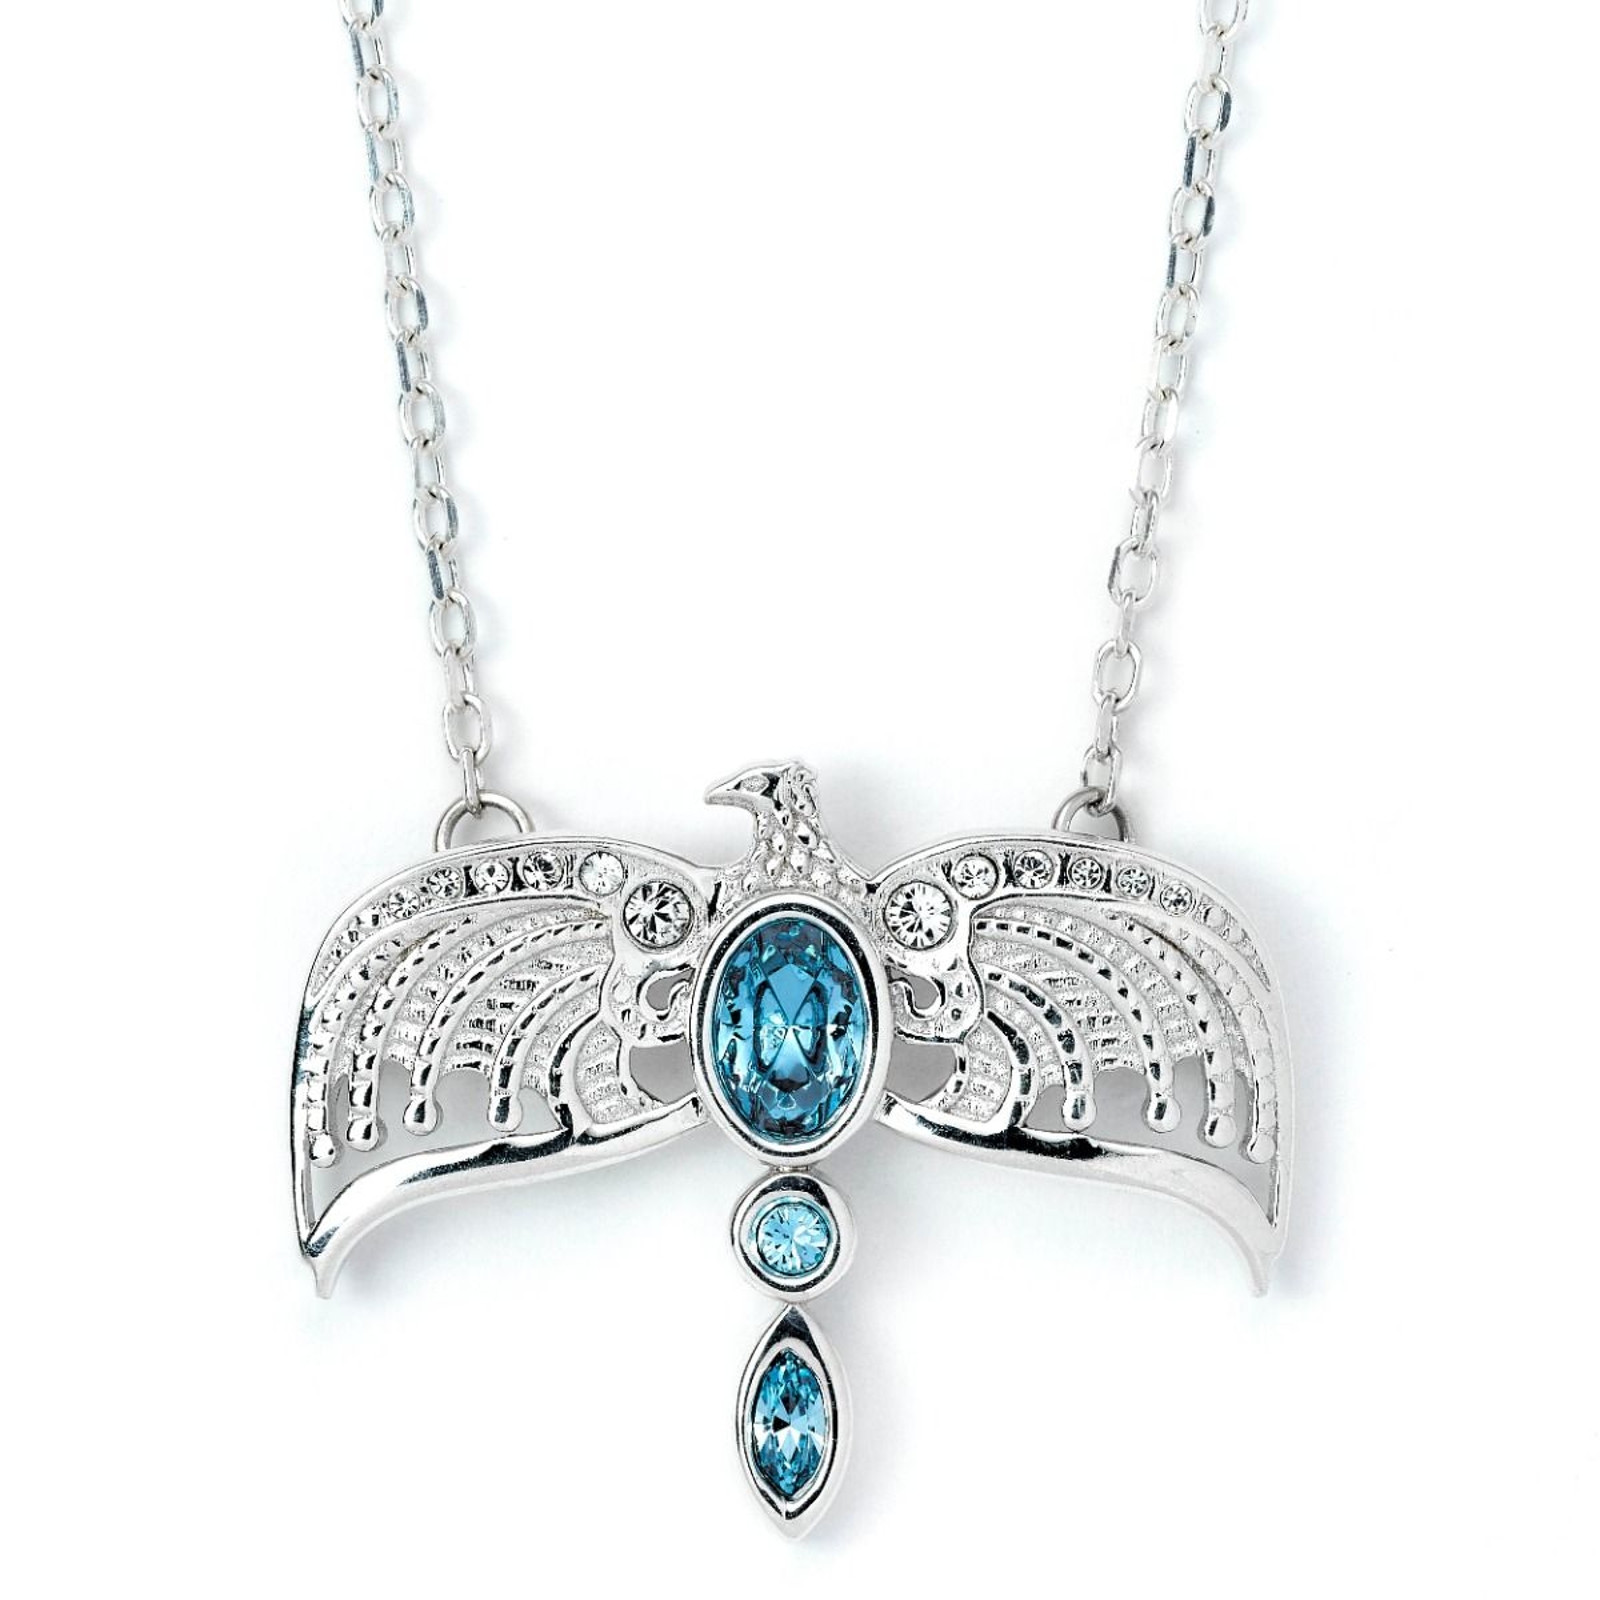 New Harry Potter Lost Diadem Of Ravenclaw Horcrux Pendant Chain Necklace Silver 